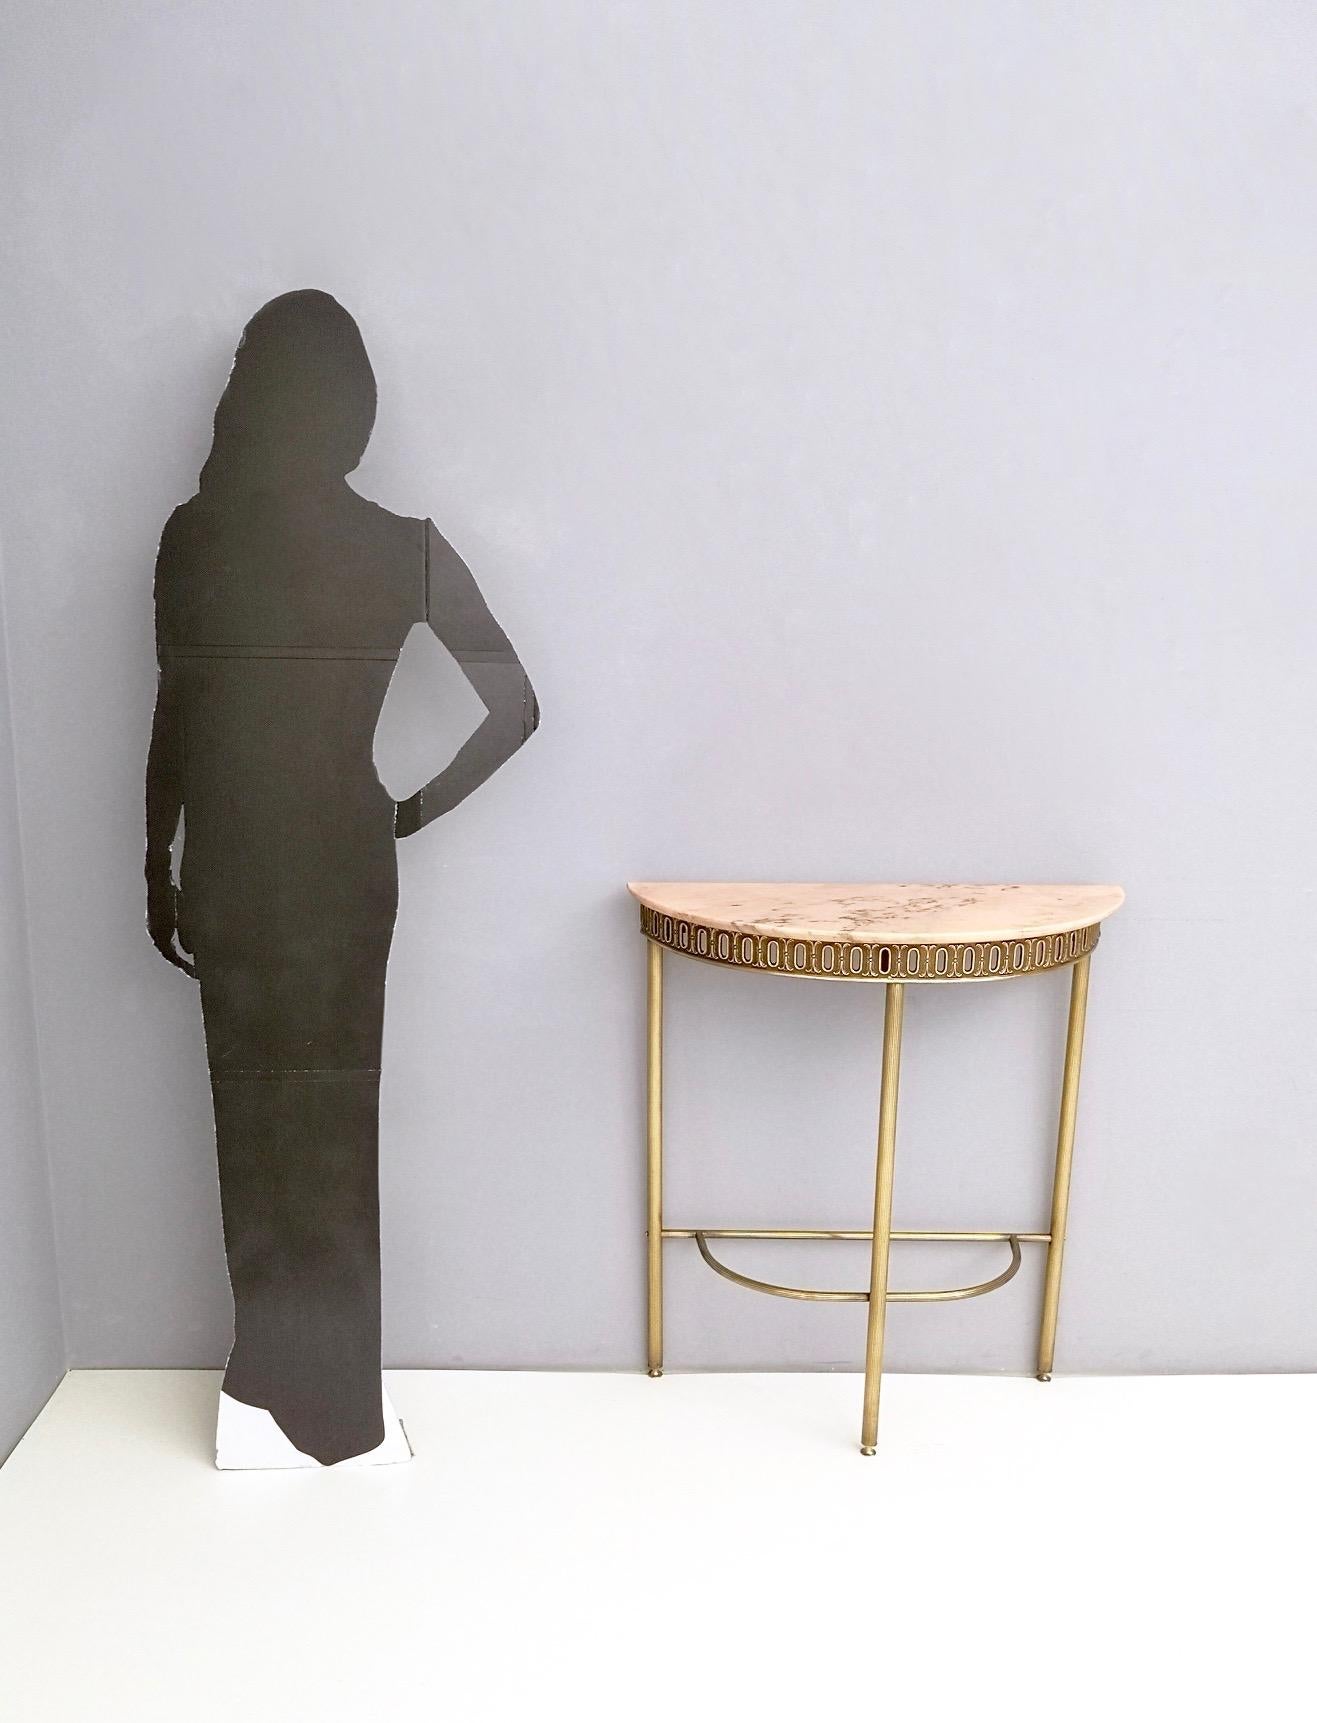 Made in brass and Portuguese pink marble. 
It might show slight traces of use since it's vintage, but it can be considered as in excellent original condition and ready to become a piece in a home.

Measures: Width 77 cm
Depth 31 cm
Height 86 cm.